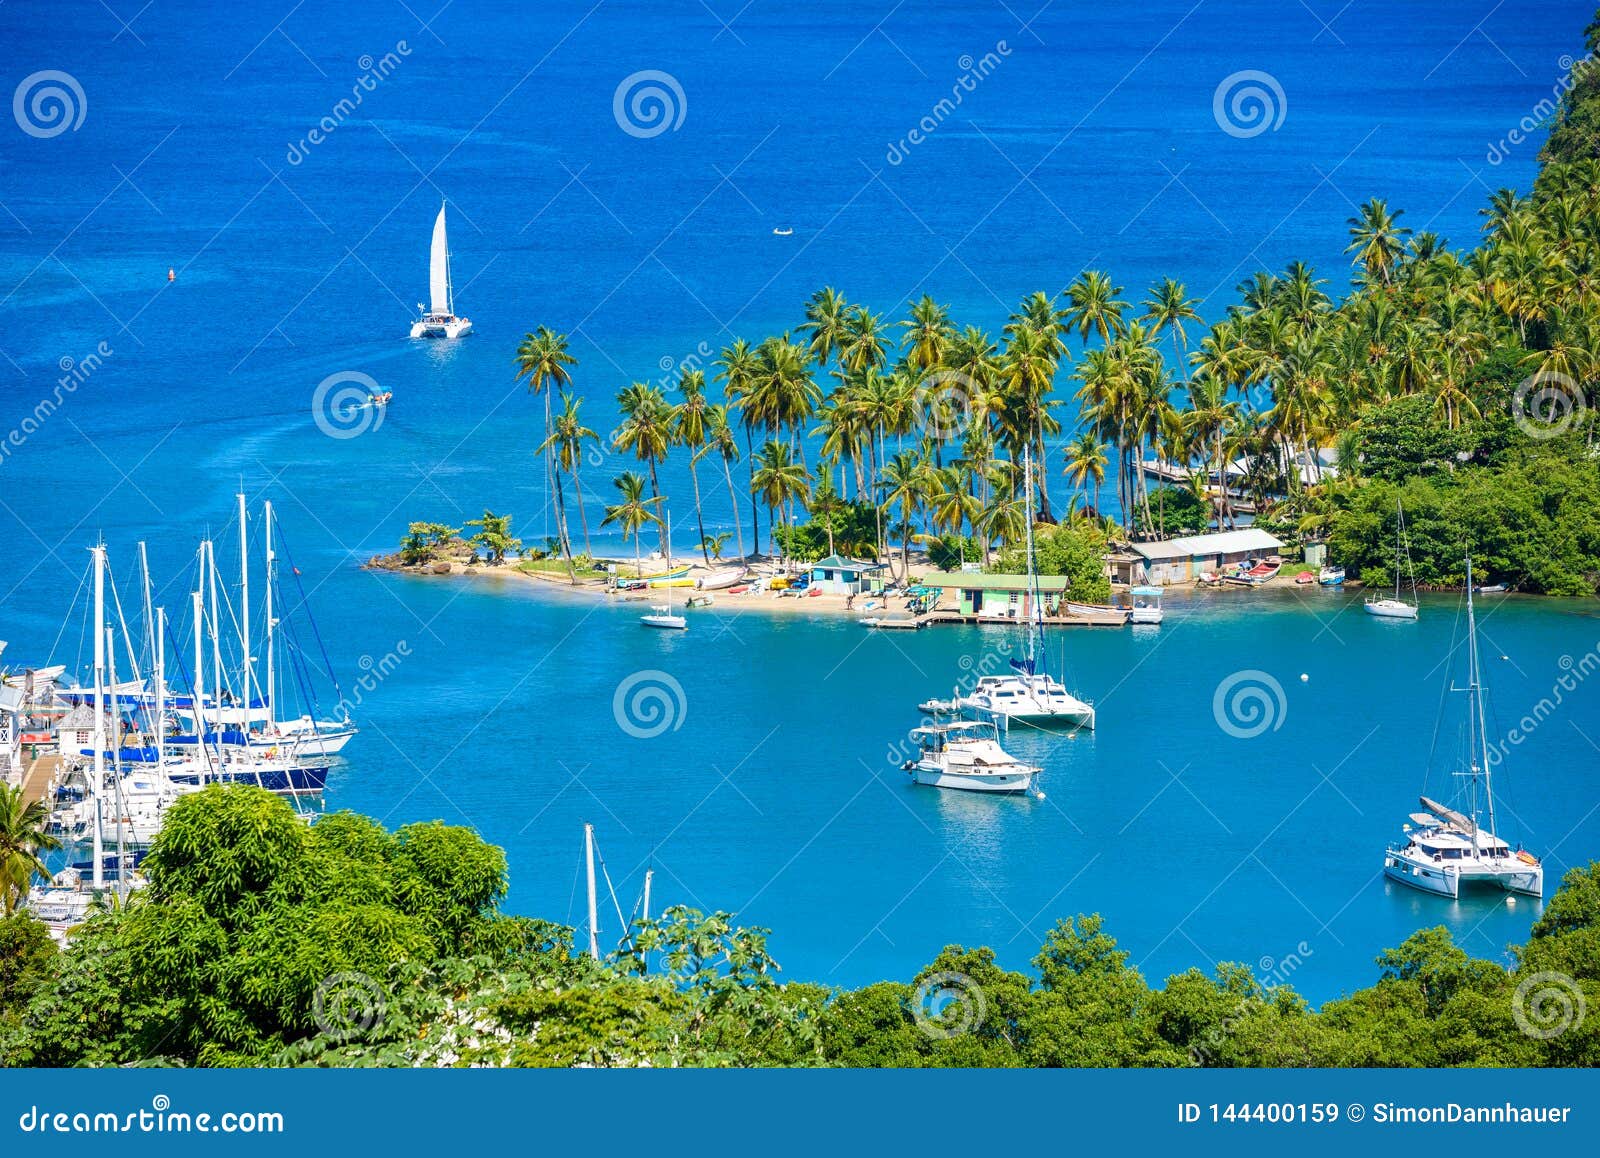 marigot bay, saint lucia, caribbean. tropical bay and beach in exotic and paradise landscape scenery. marigot bay is located on